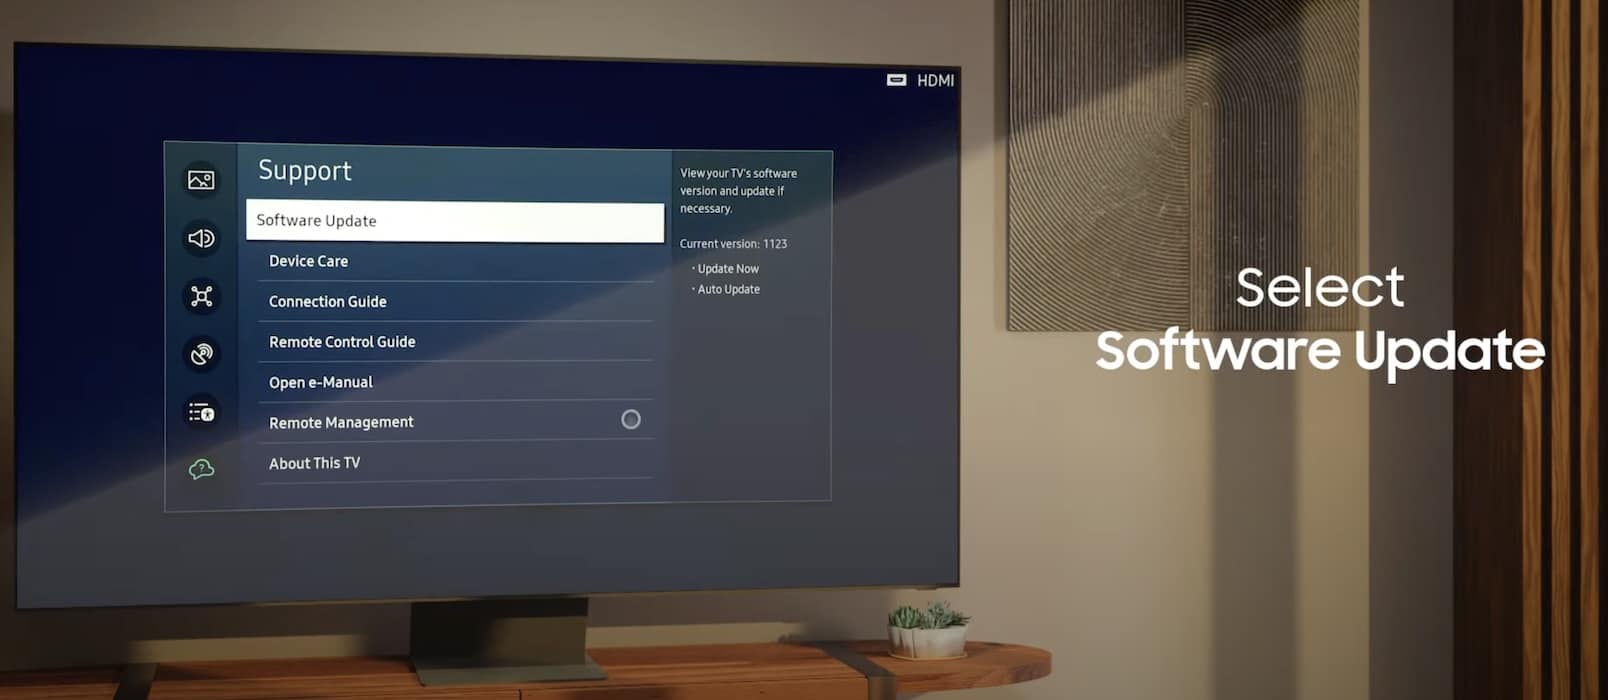 Samsung TV Software Update Section